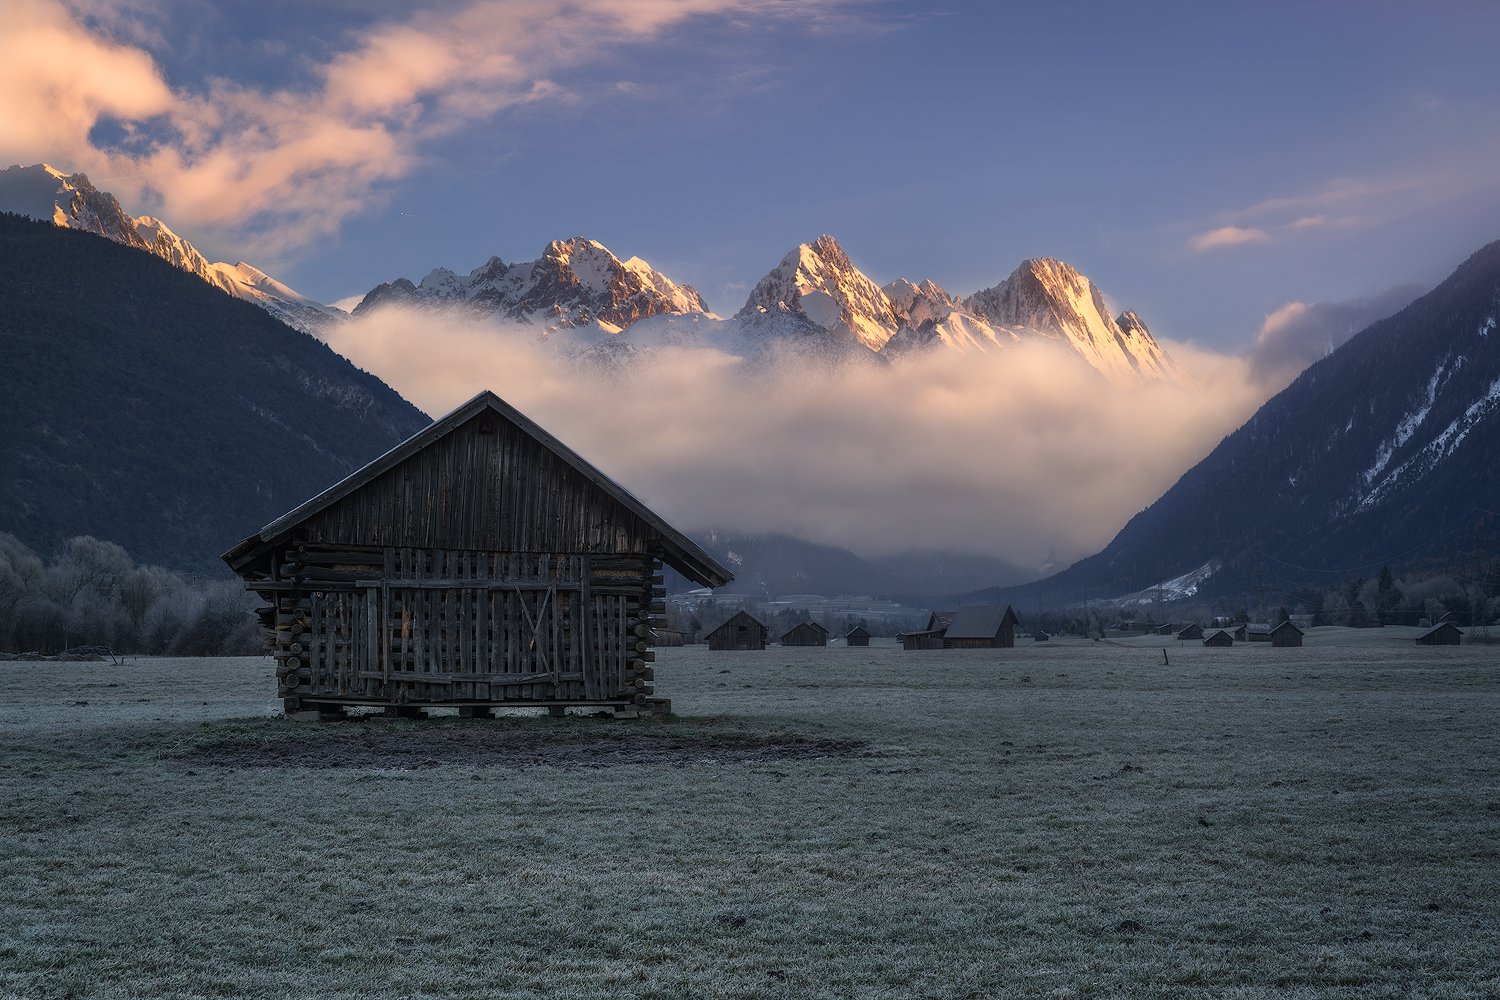 acres, agicutural building, agriculture, alps, austria, austrian alps, barns, clouds, farmhouse, fog, foggy, forest, frost, frosty, gurgltal, hey barns, hill, hills, houses, hovel, huts, imst, landscape, log cabin, meadows, morning, morning glow, moulton , Ludwig Riml